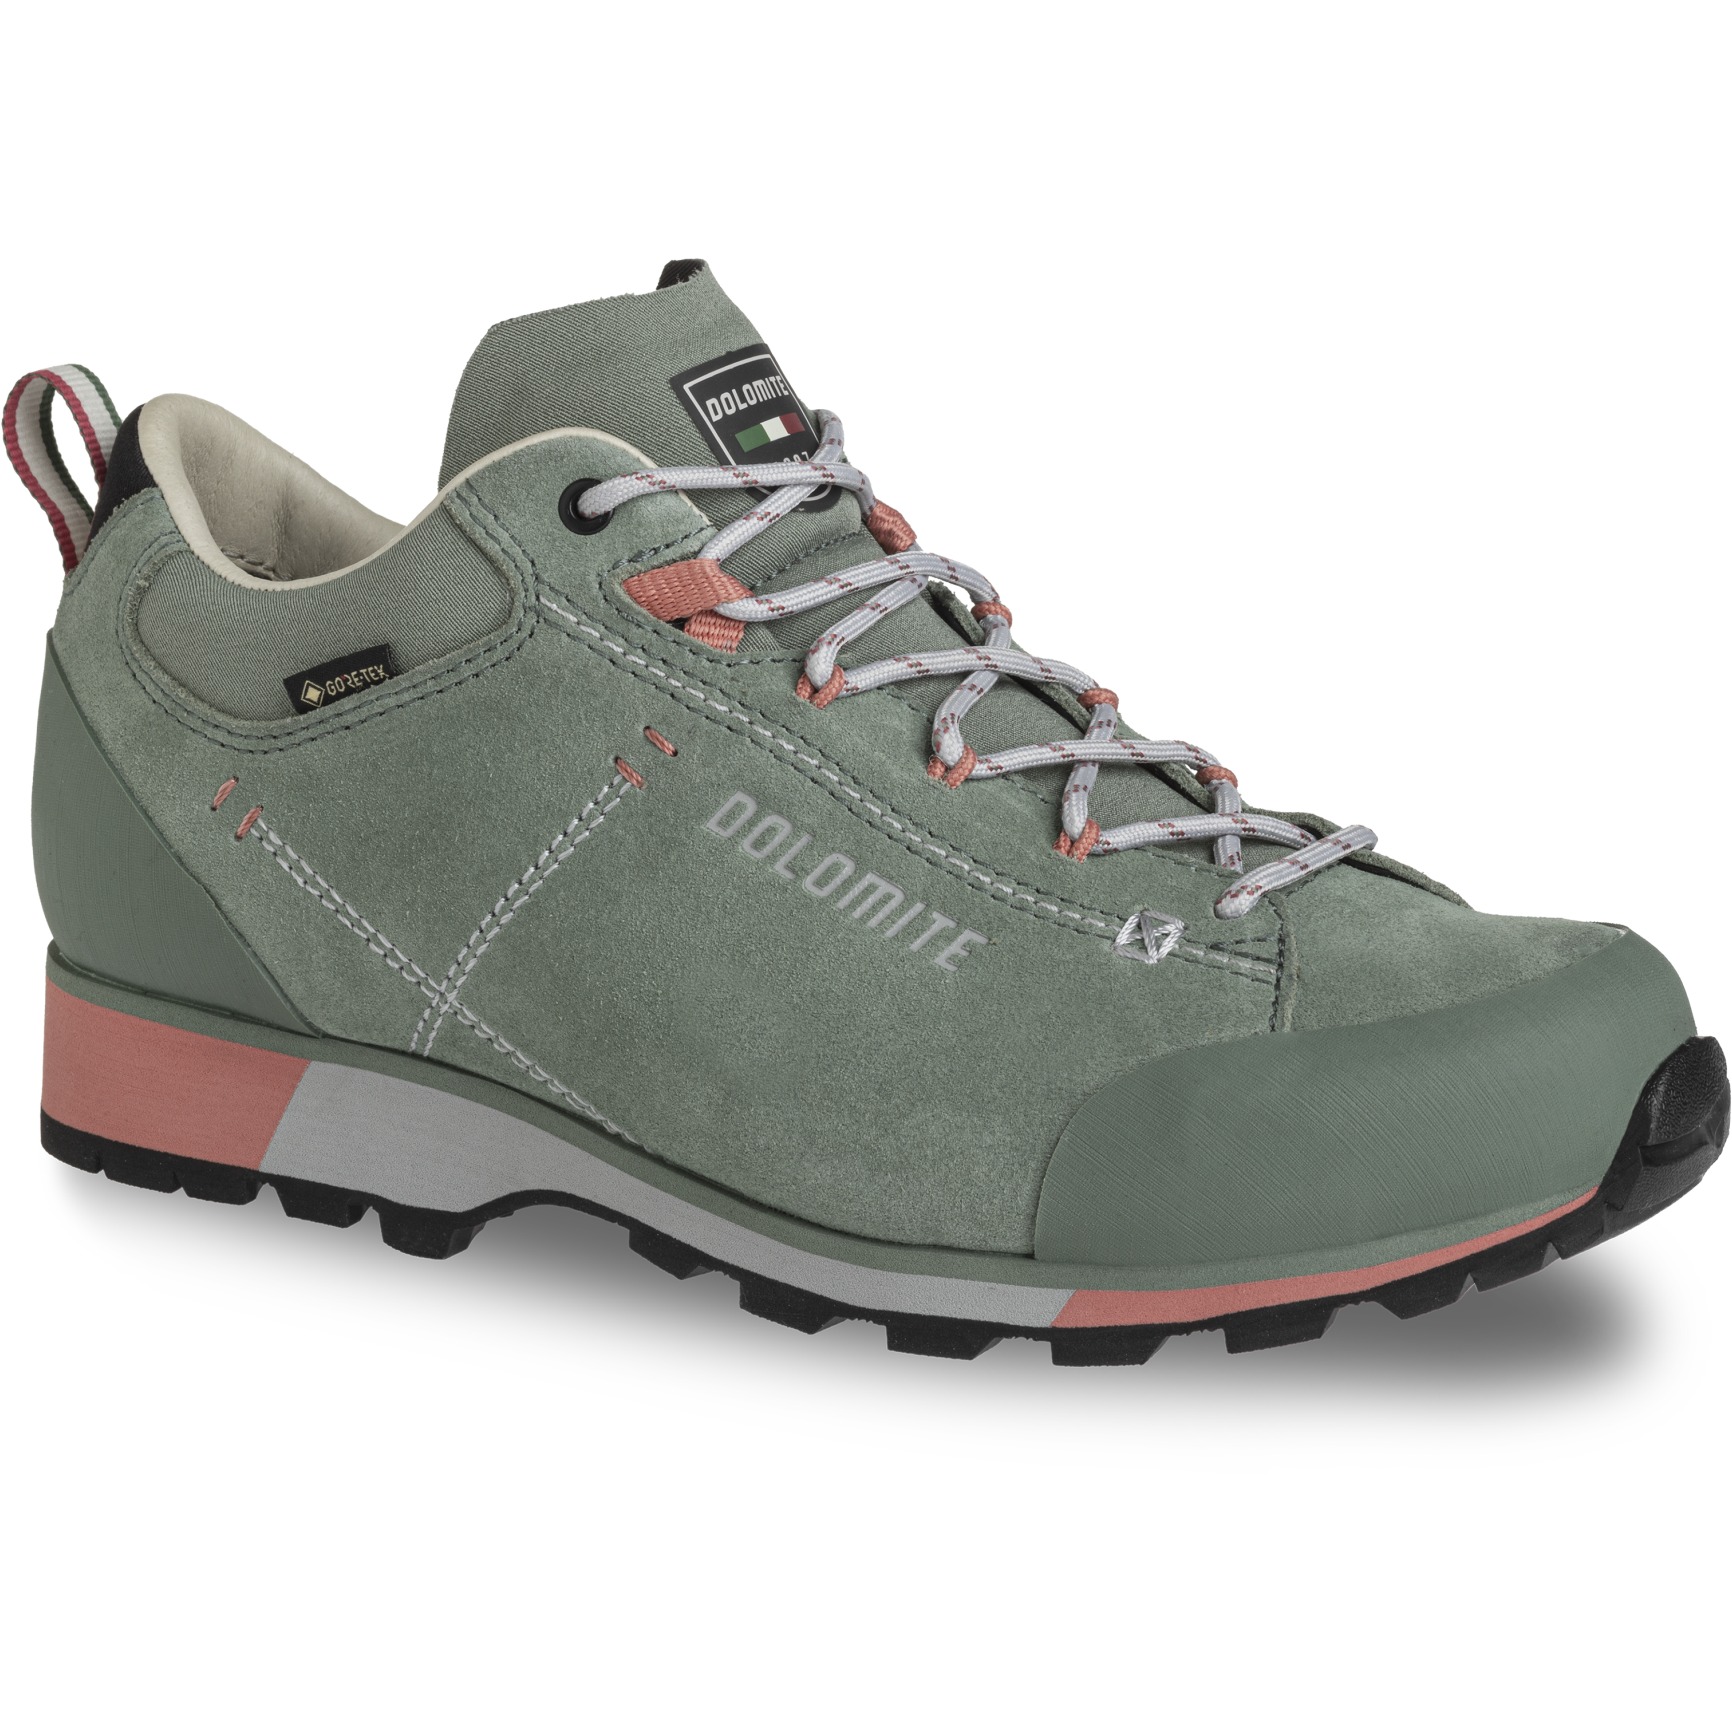 Image of Dolomite 54 Hike Low Evo GORE-TEX Shoes Women - sage green